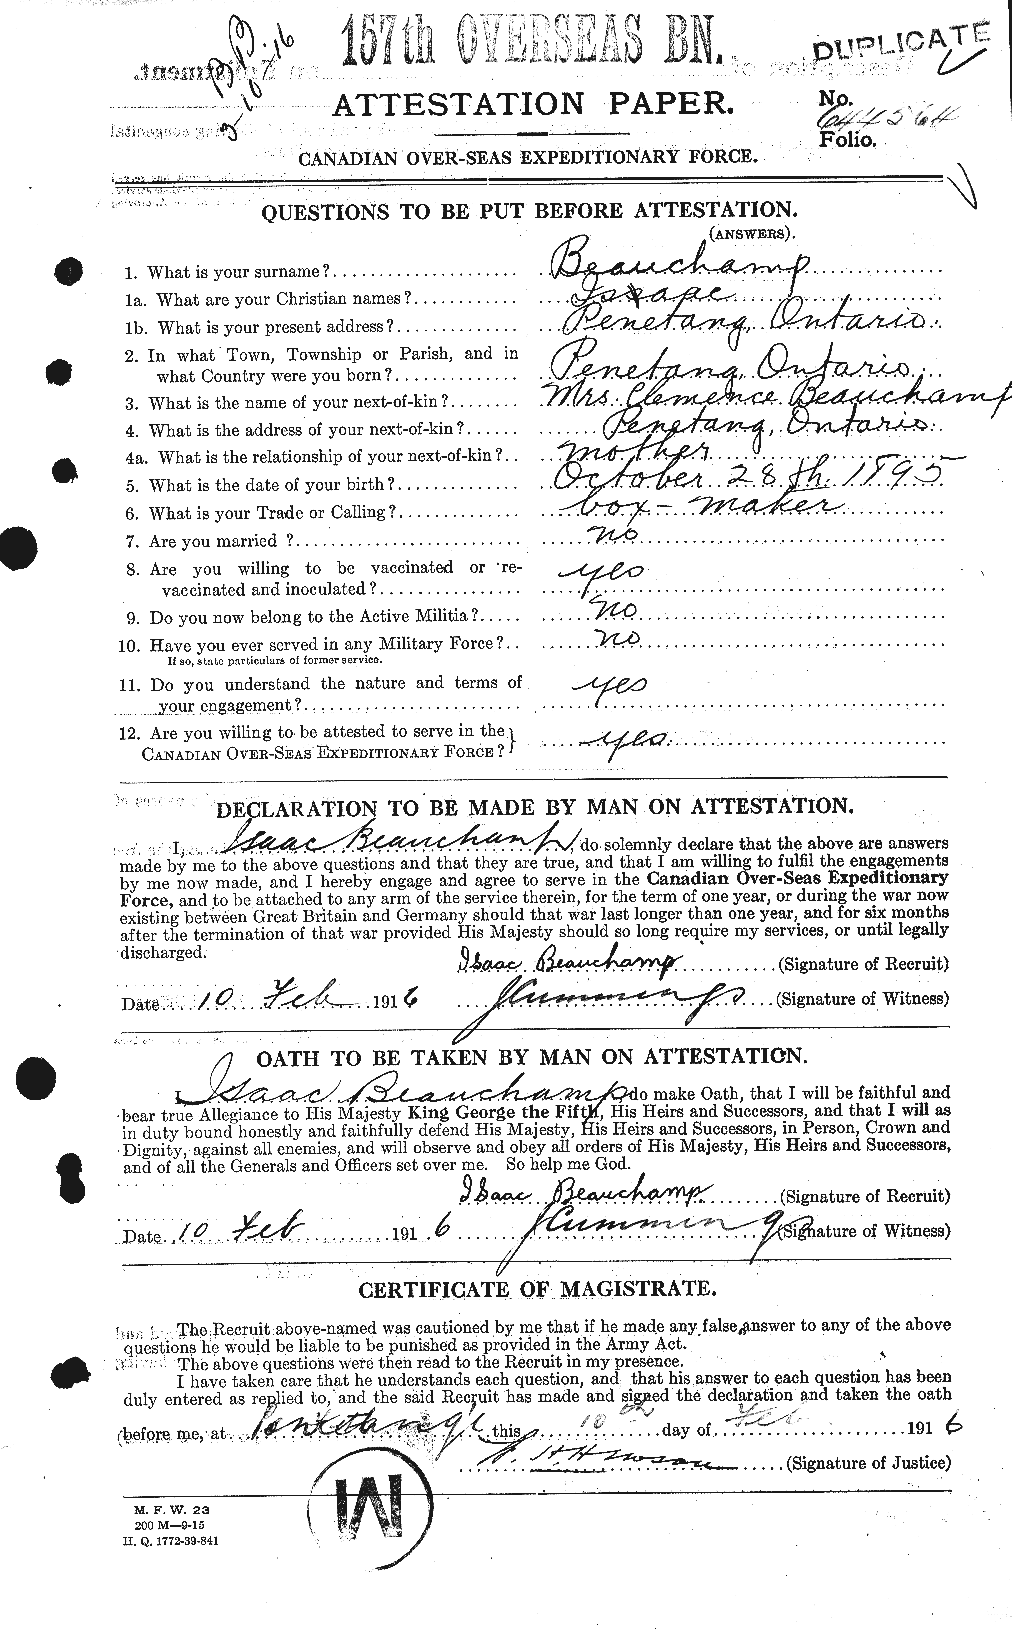 Personnel Records of the First World War - CEF 230982a